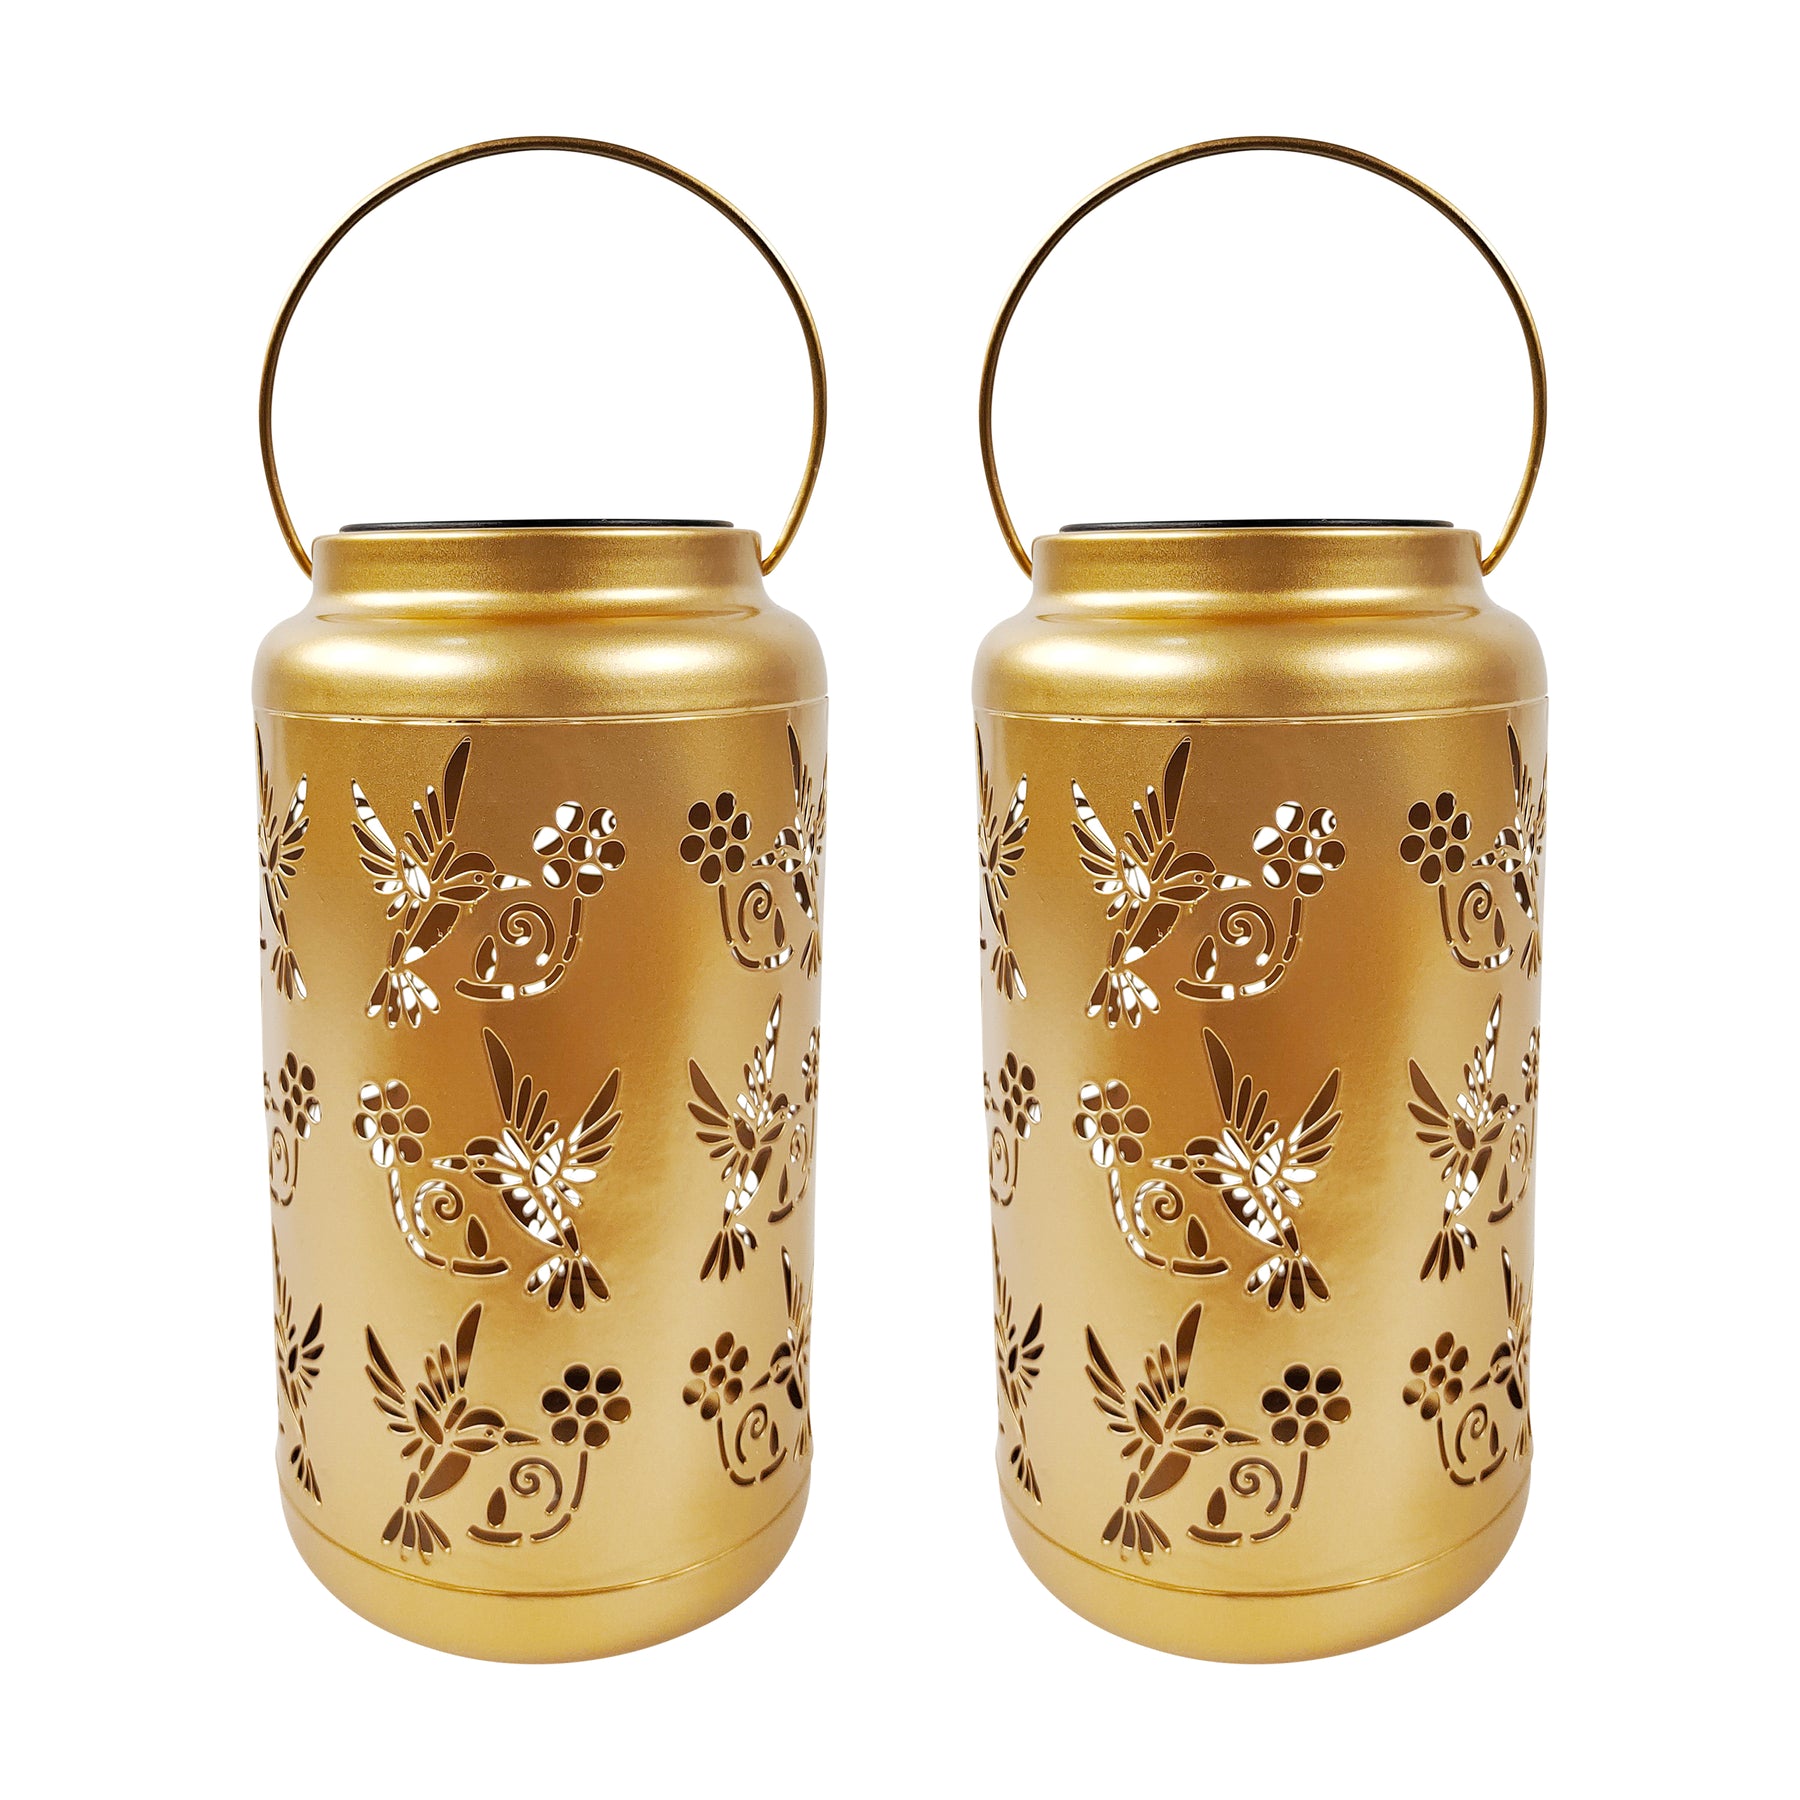 Bliss Outdoors 9-inch Tall 2-Pack Hanging and Tabletop Decorative Solar LED Lantern with Unique Humming Bird Design and Antique Hand Painted Finish in the gold variation.